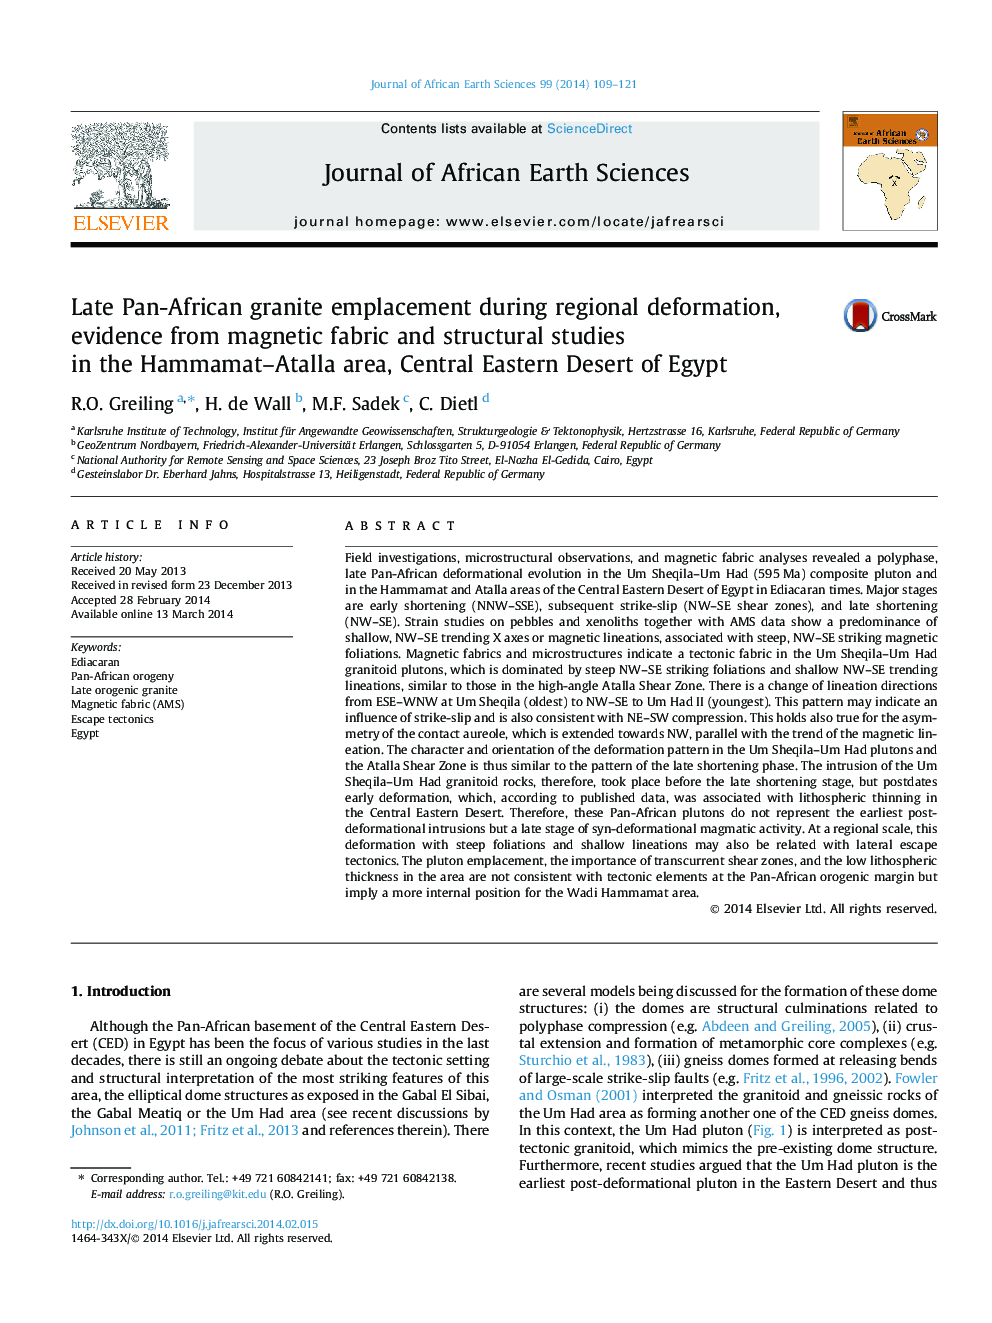 Late Pan-African granite emplacement during regional deformation, evidence from magnetic fabric and structural studies in the Hammamat–Atalla area, Central Eastern Desert of Egypt